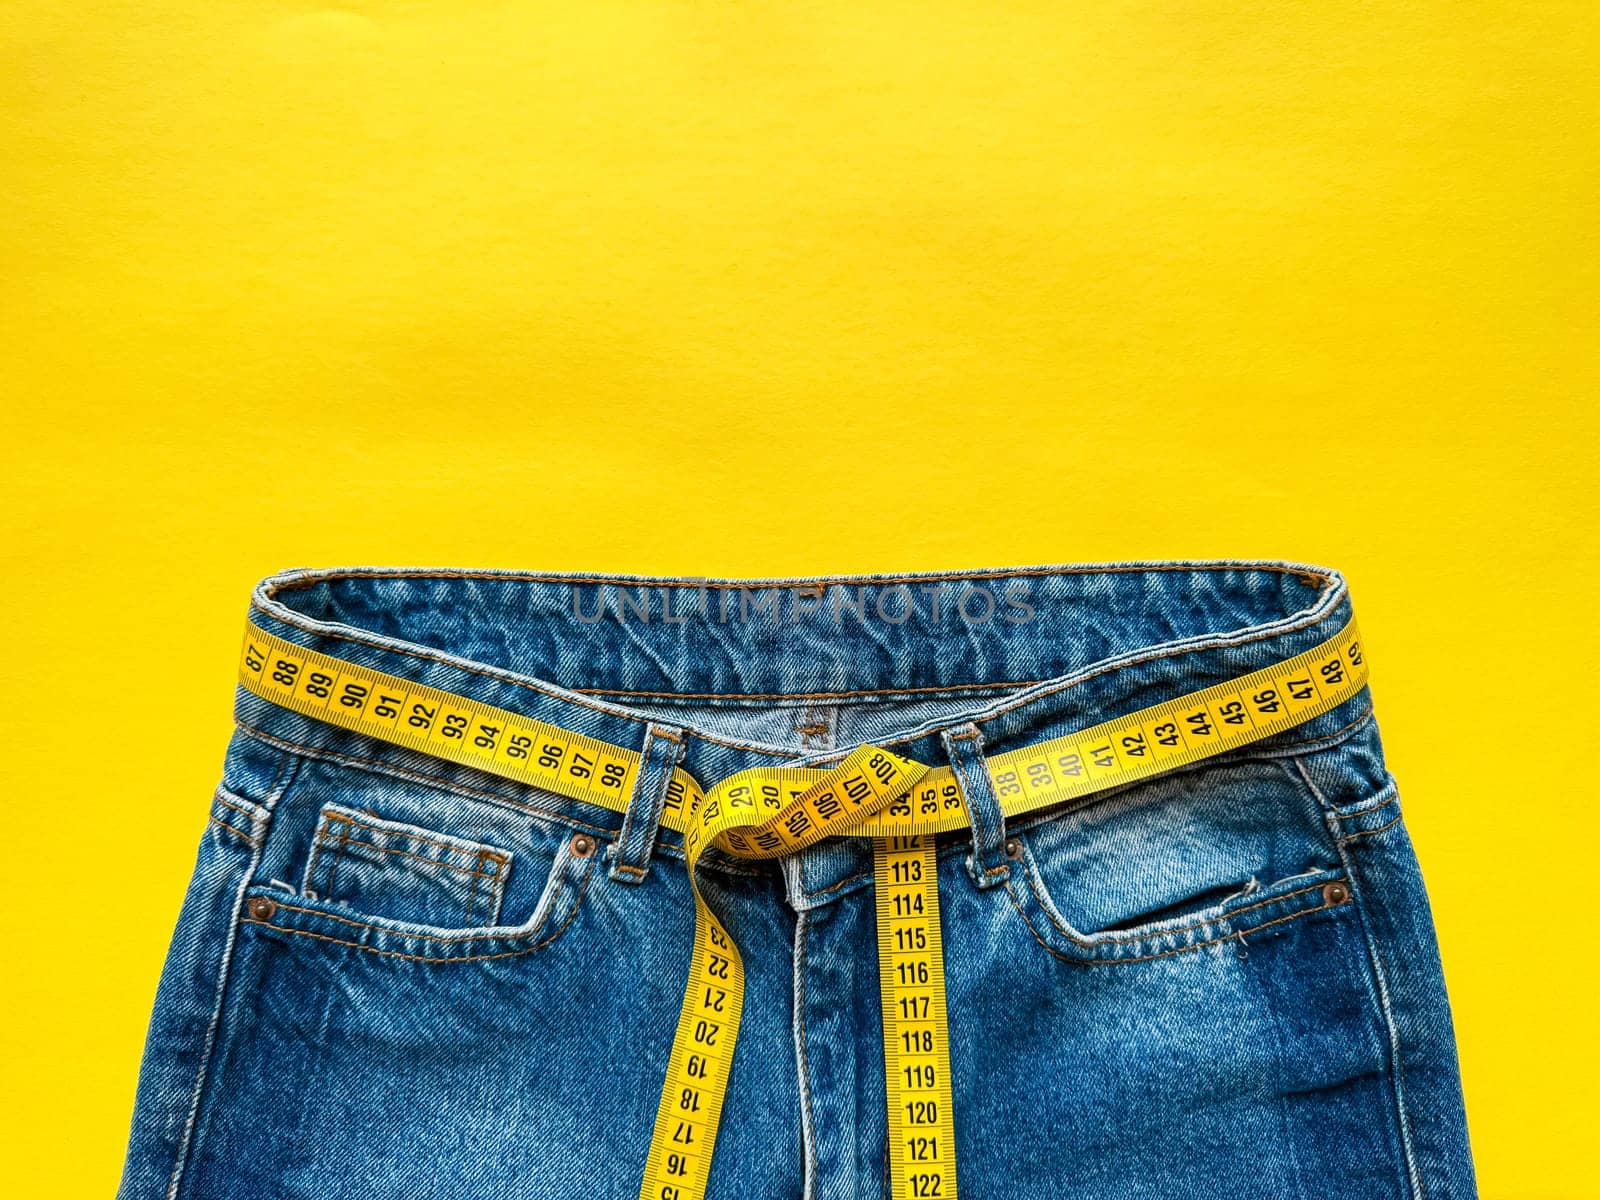 Blue jeans with measuring tape as belt on bright yellow background with copy space. Depicting weight loss, diet, and healthy lifestyle concept. Top view. High quality photo